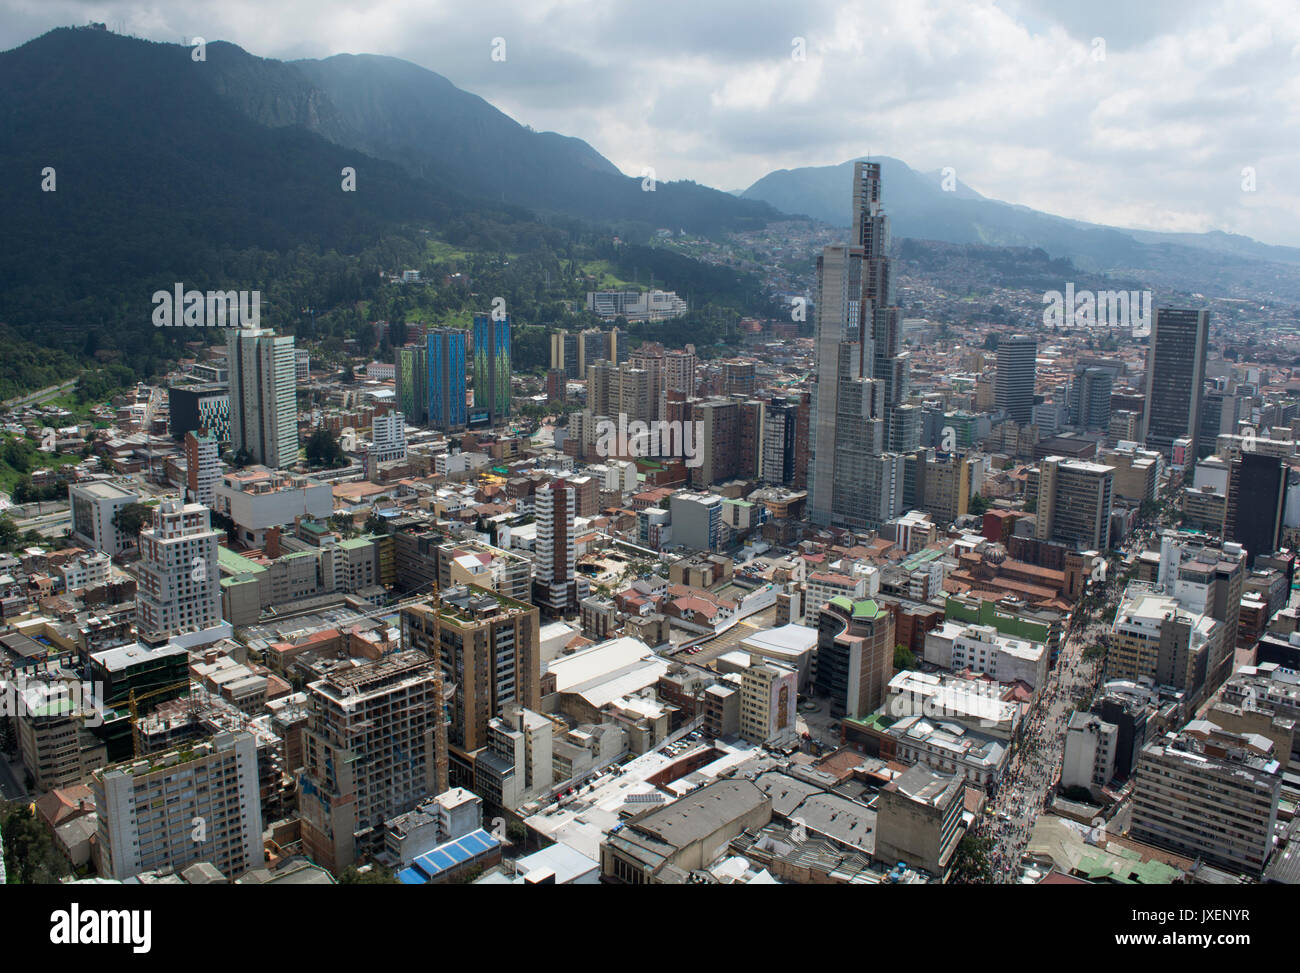 BOGOTA, COLOMBIA - JANUARY 15, 2017: A view of Bogota, planetarium and the bullring of Bogota from the top of the Colpatria building. Stock Photo